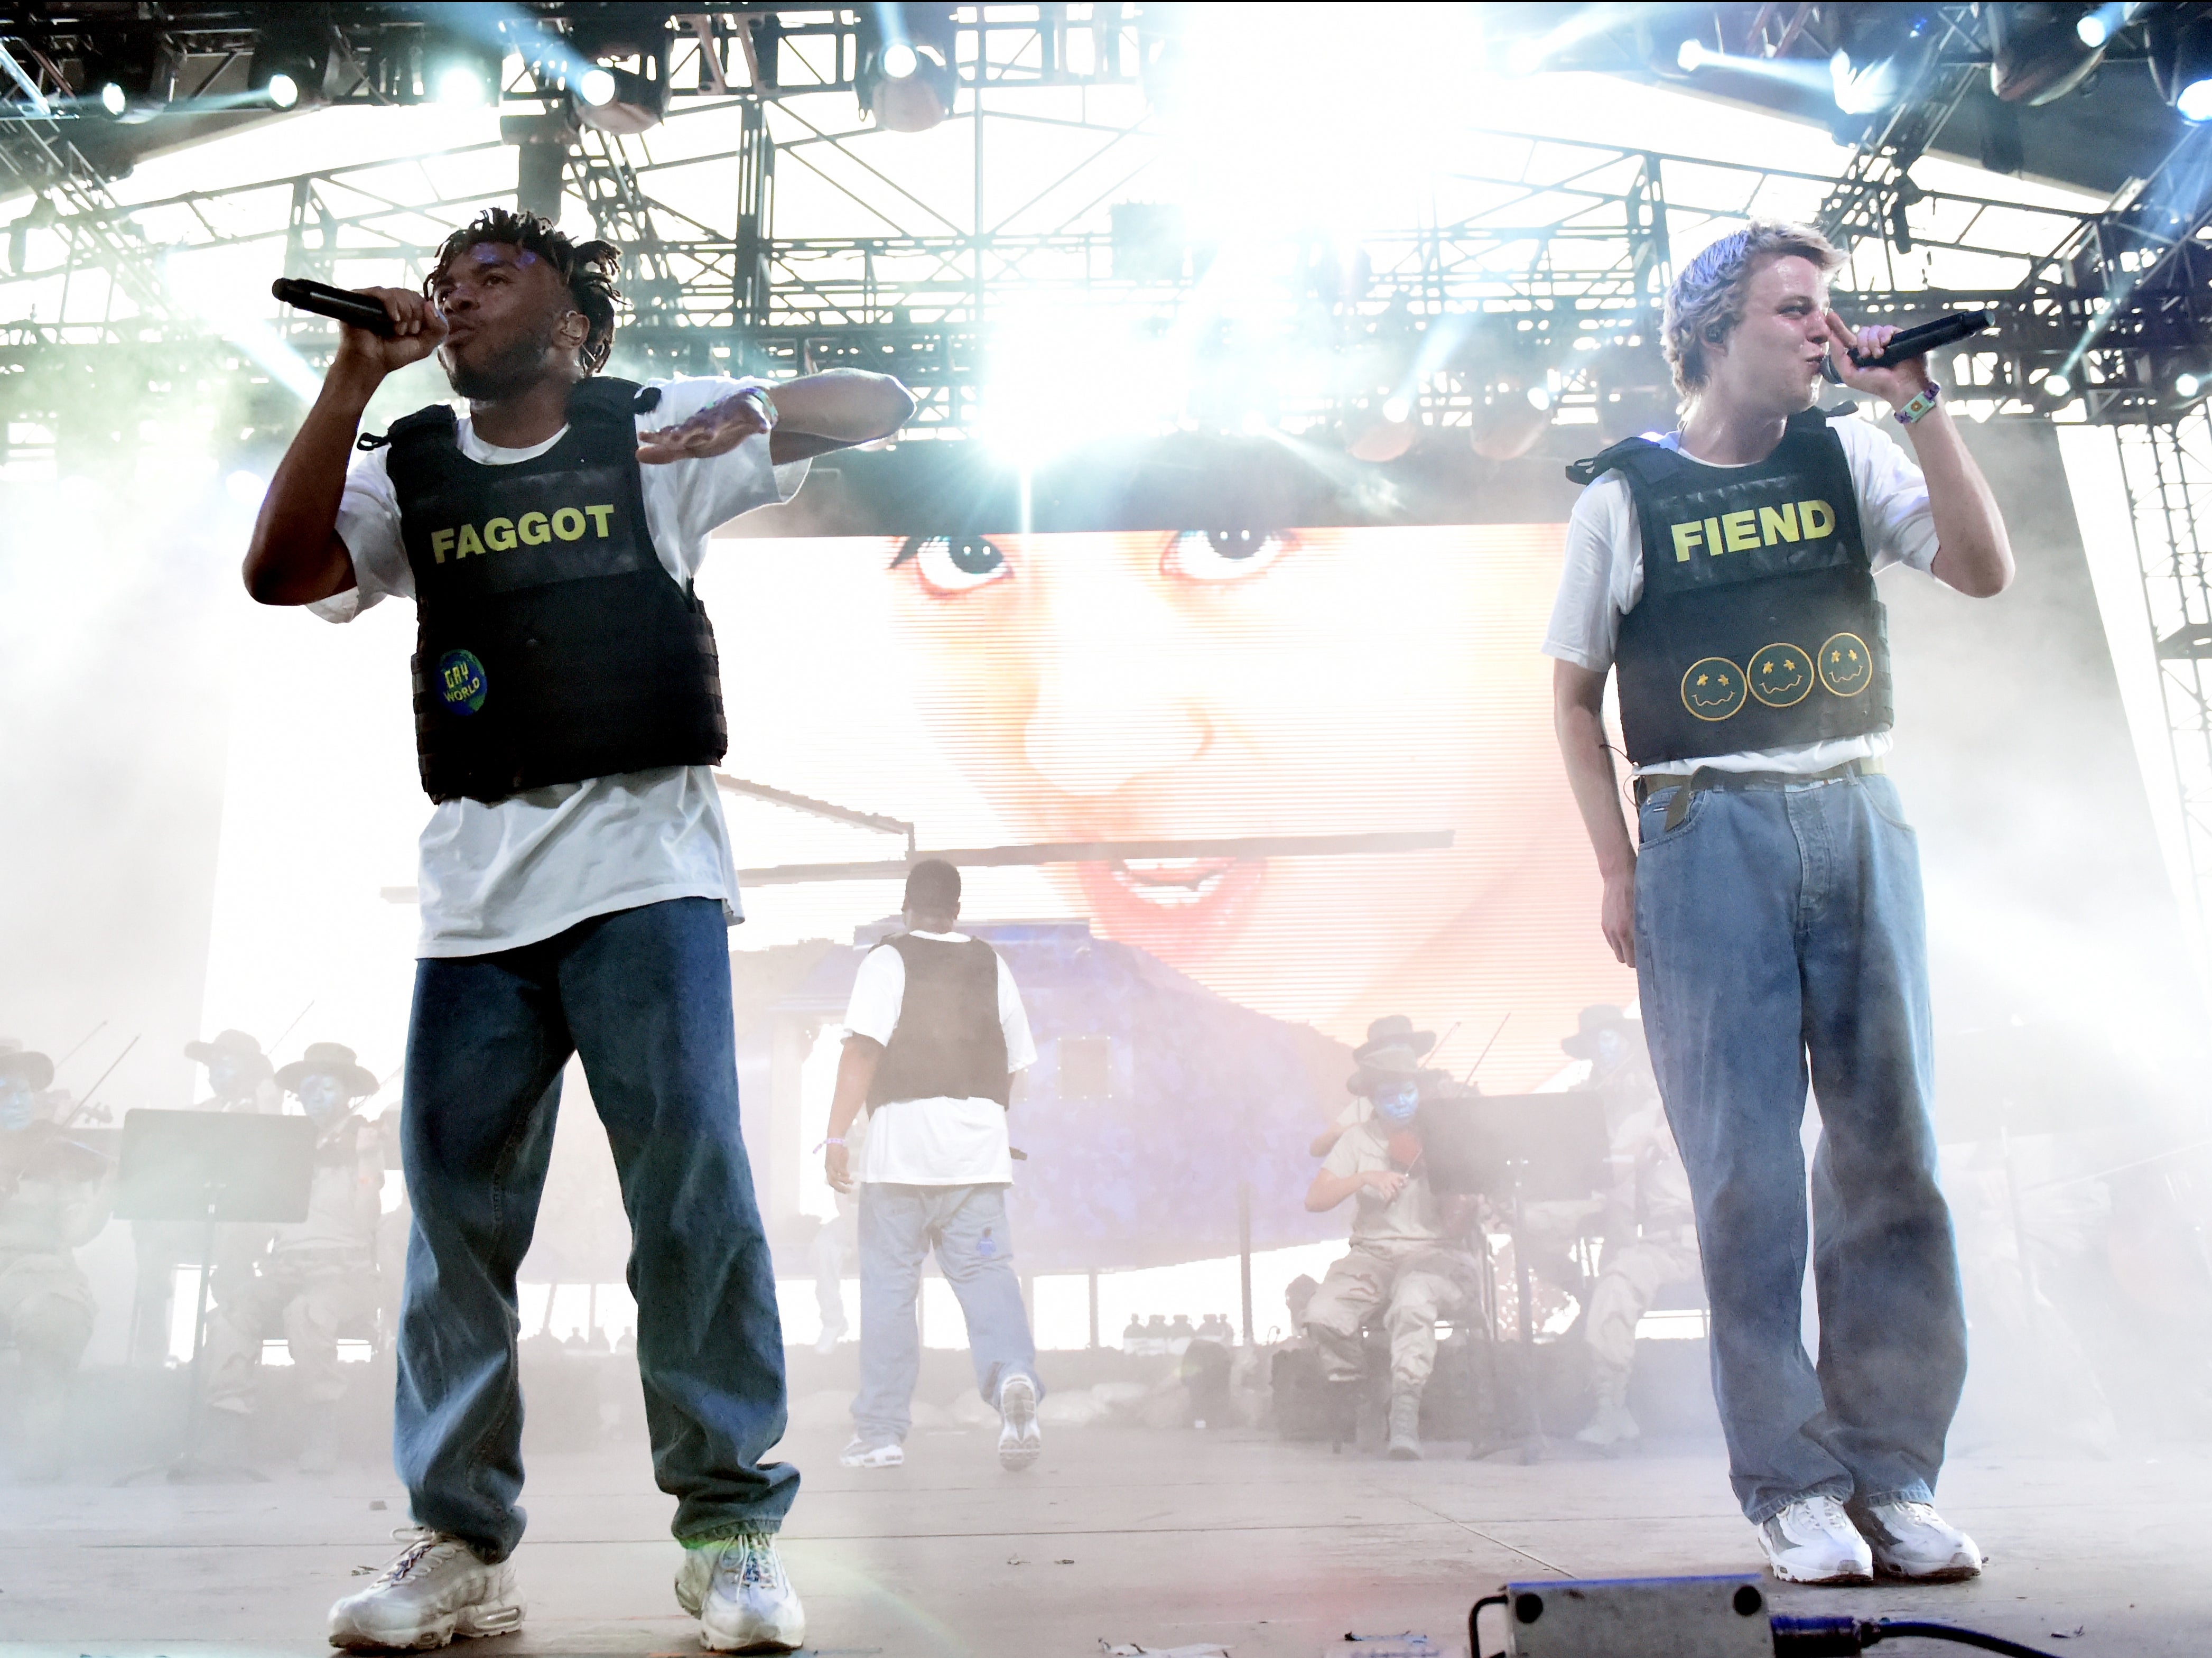 Brockhampton’s Kevin Abstract (L) and Russell Boring perform at Coachella in 2018